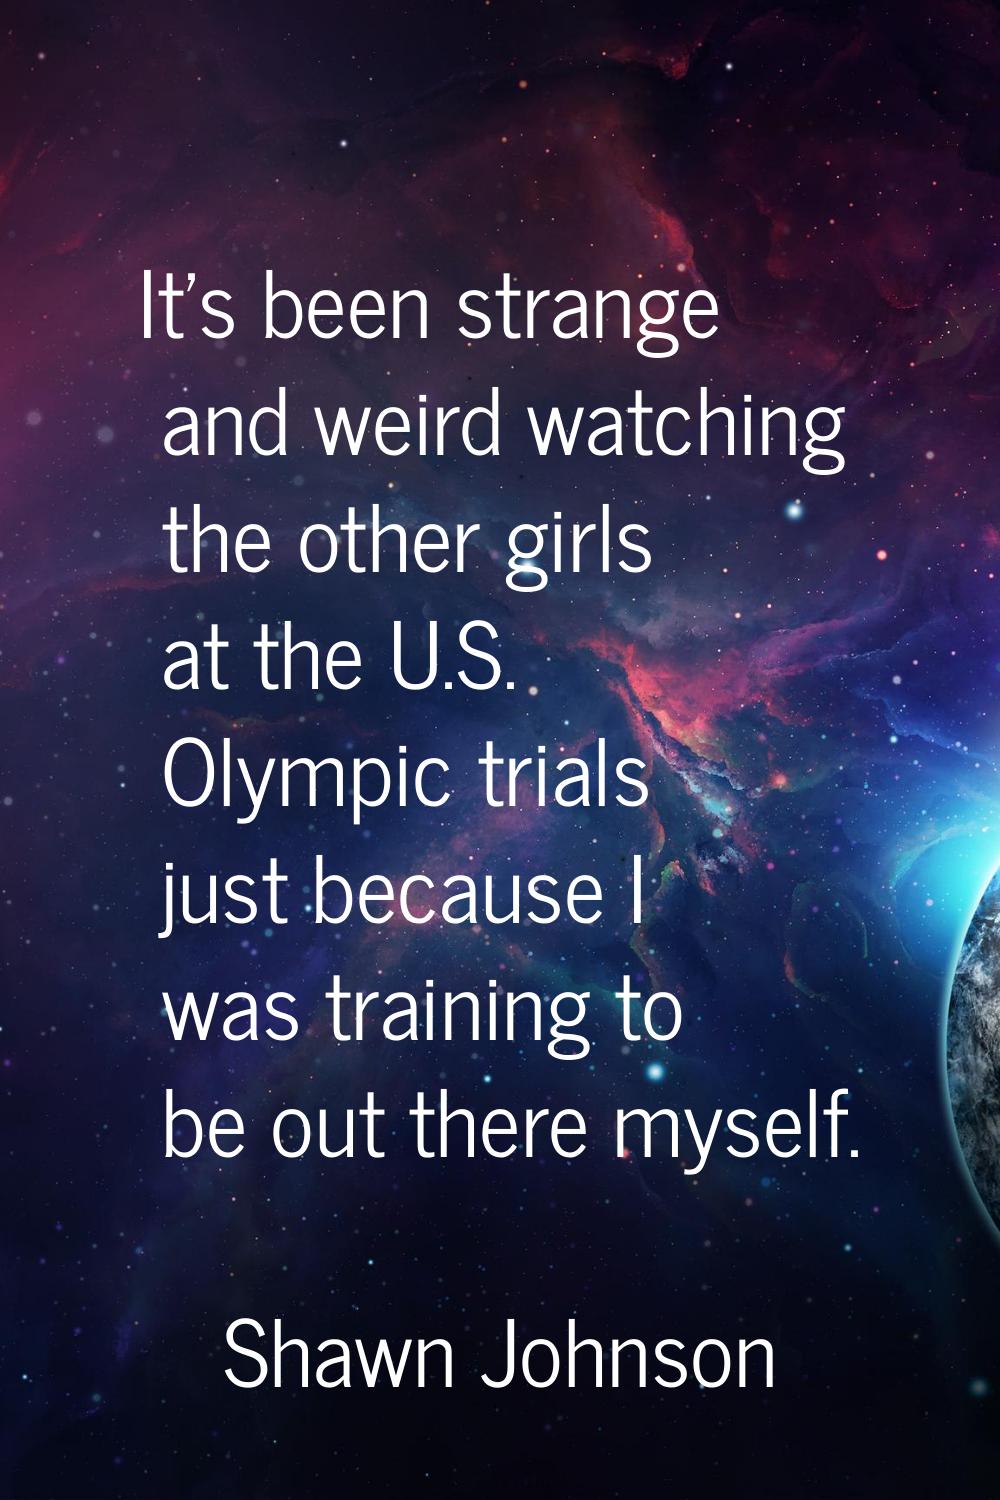 It's been strange and weird watching the other girls at the U.S. Olympic trials just because I was 